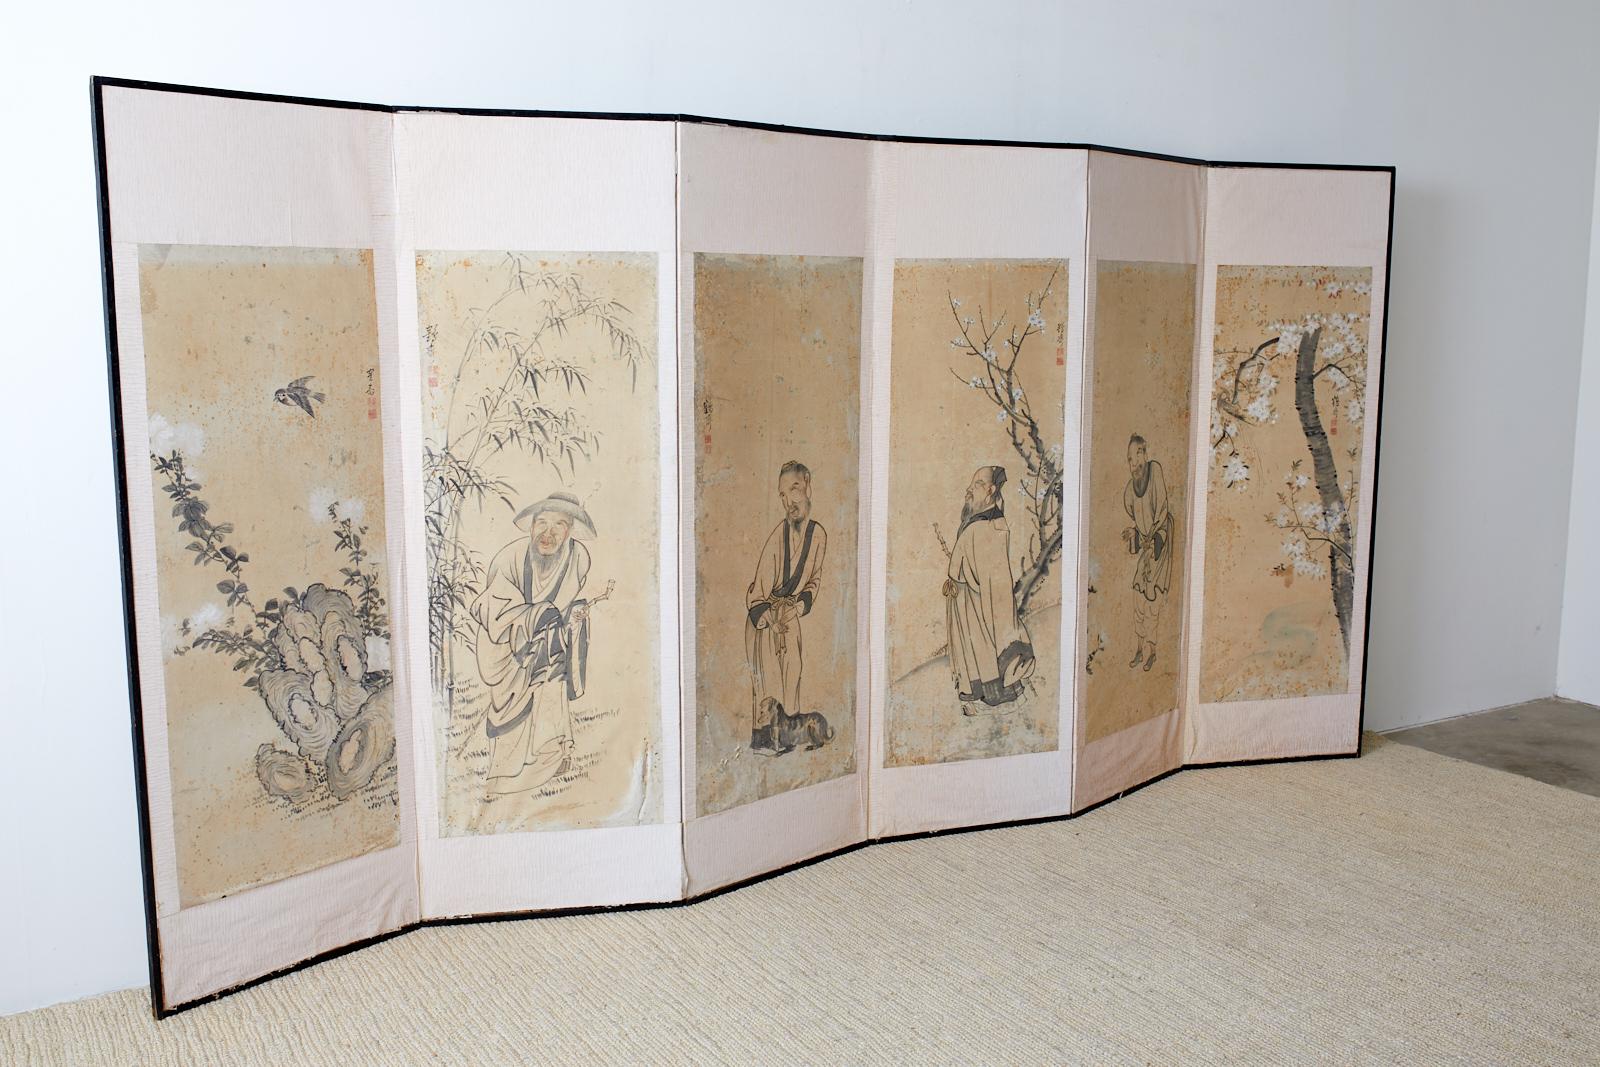 Meiji period Korean six-panel screen depicting legendary Chinese figures on individual panels with birds and blossoming flowers. Each panel is signed Kakusai (studio of the crane) in Japanese with a seal. Ink and color pigments on paper mounted to